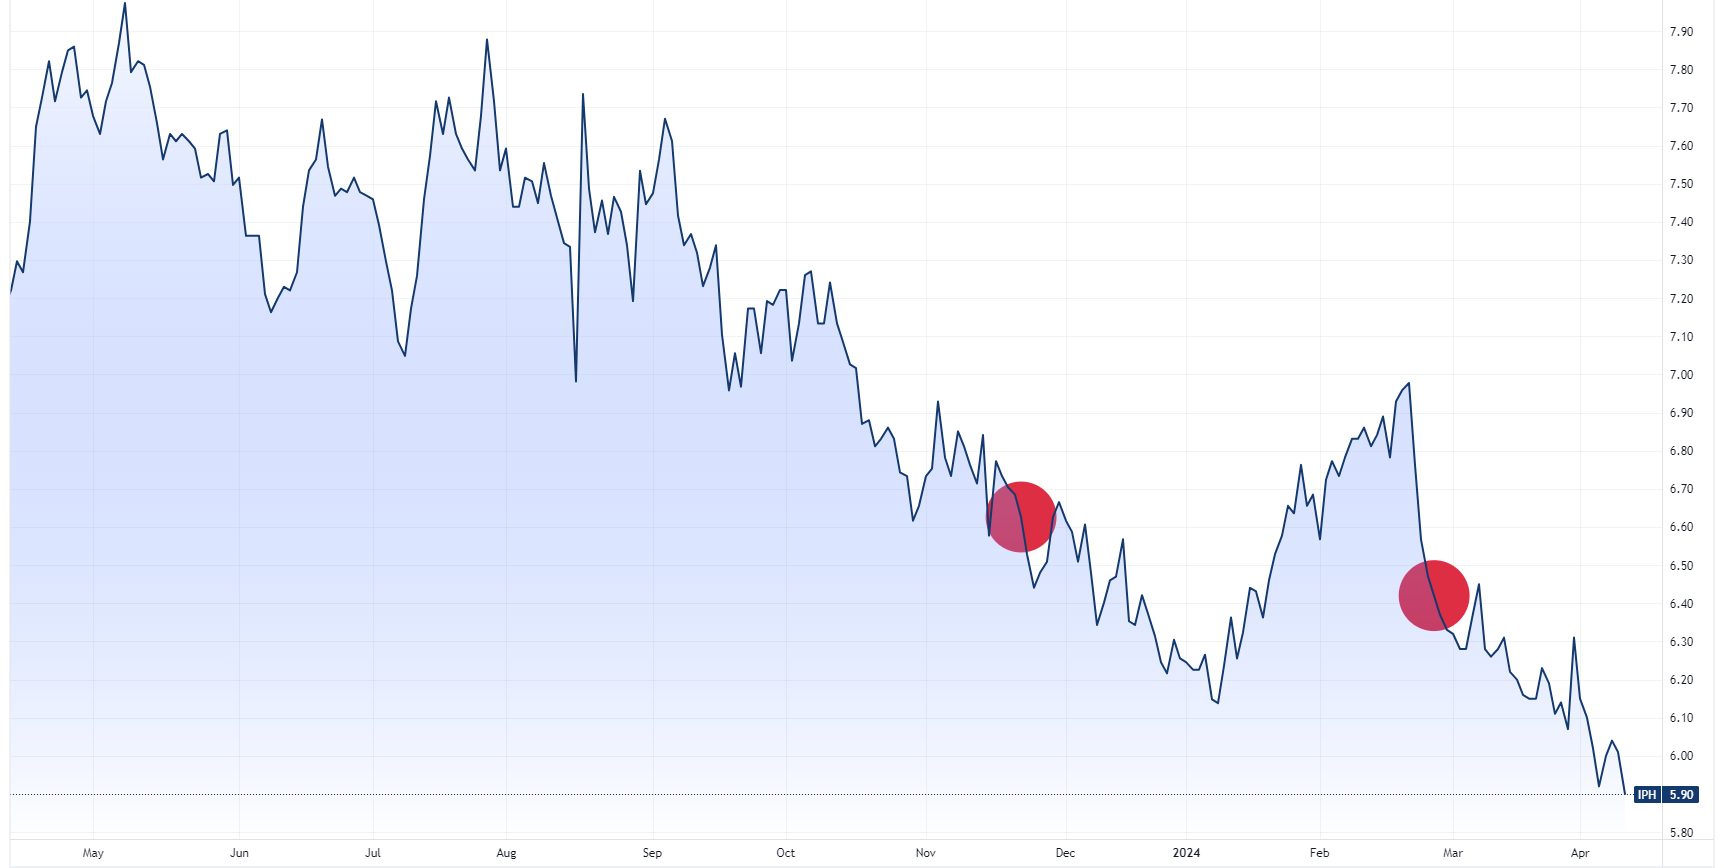 IPH share price chart with CEO sell-downs marked in red (Source: TradingView)